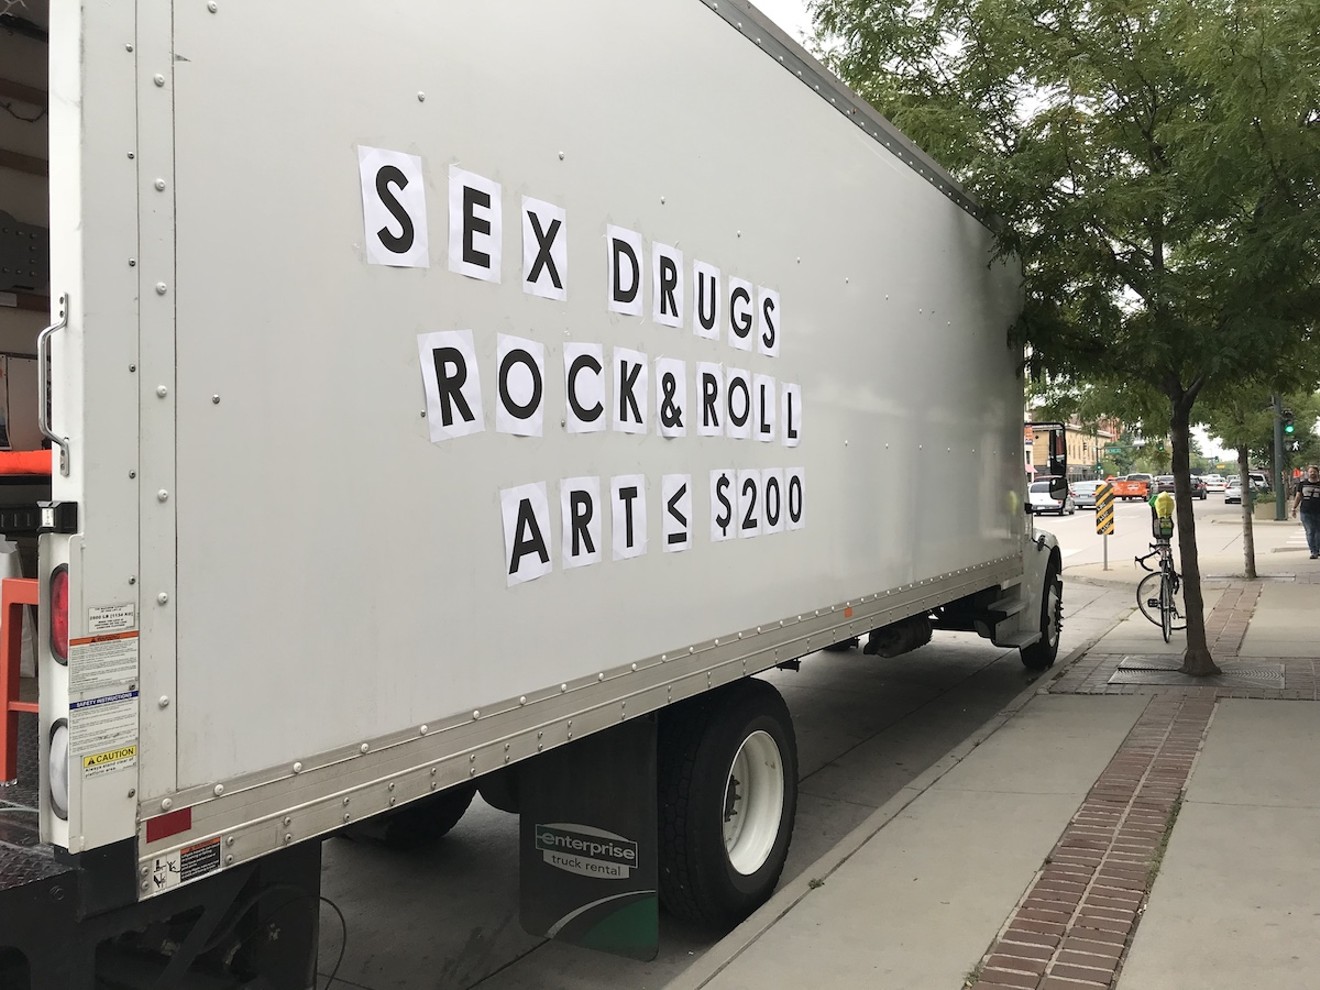 Find affordable art on Hey Hue's Sex Drugs Rock & Roll Truck Gallery.